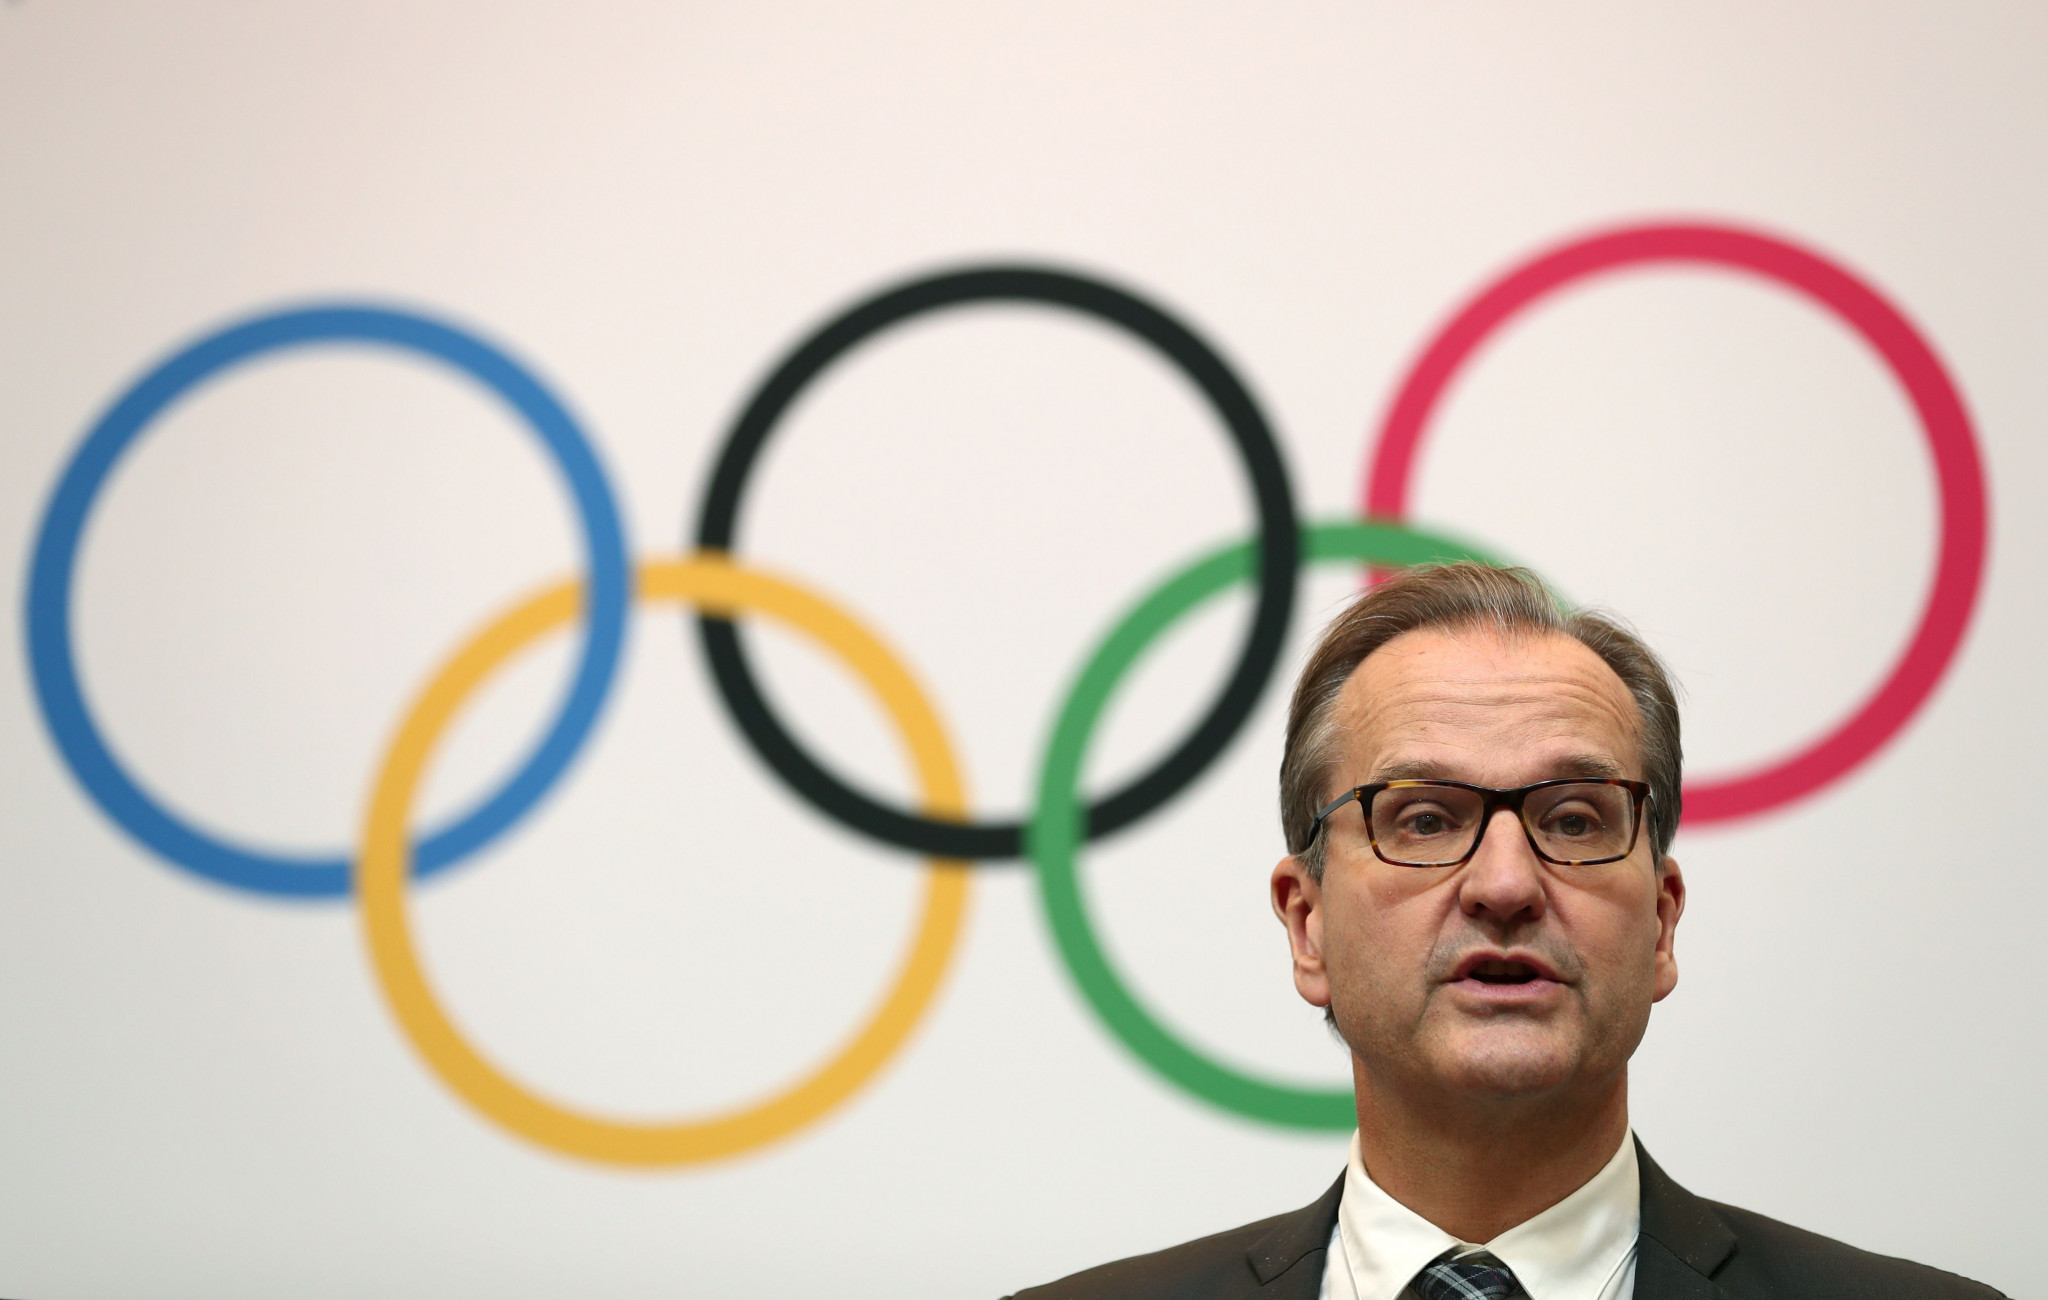 IOC spokesperson Mark Adams stated that if the IBA is at risk of showing 